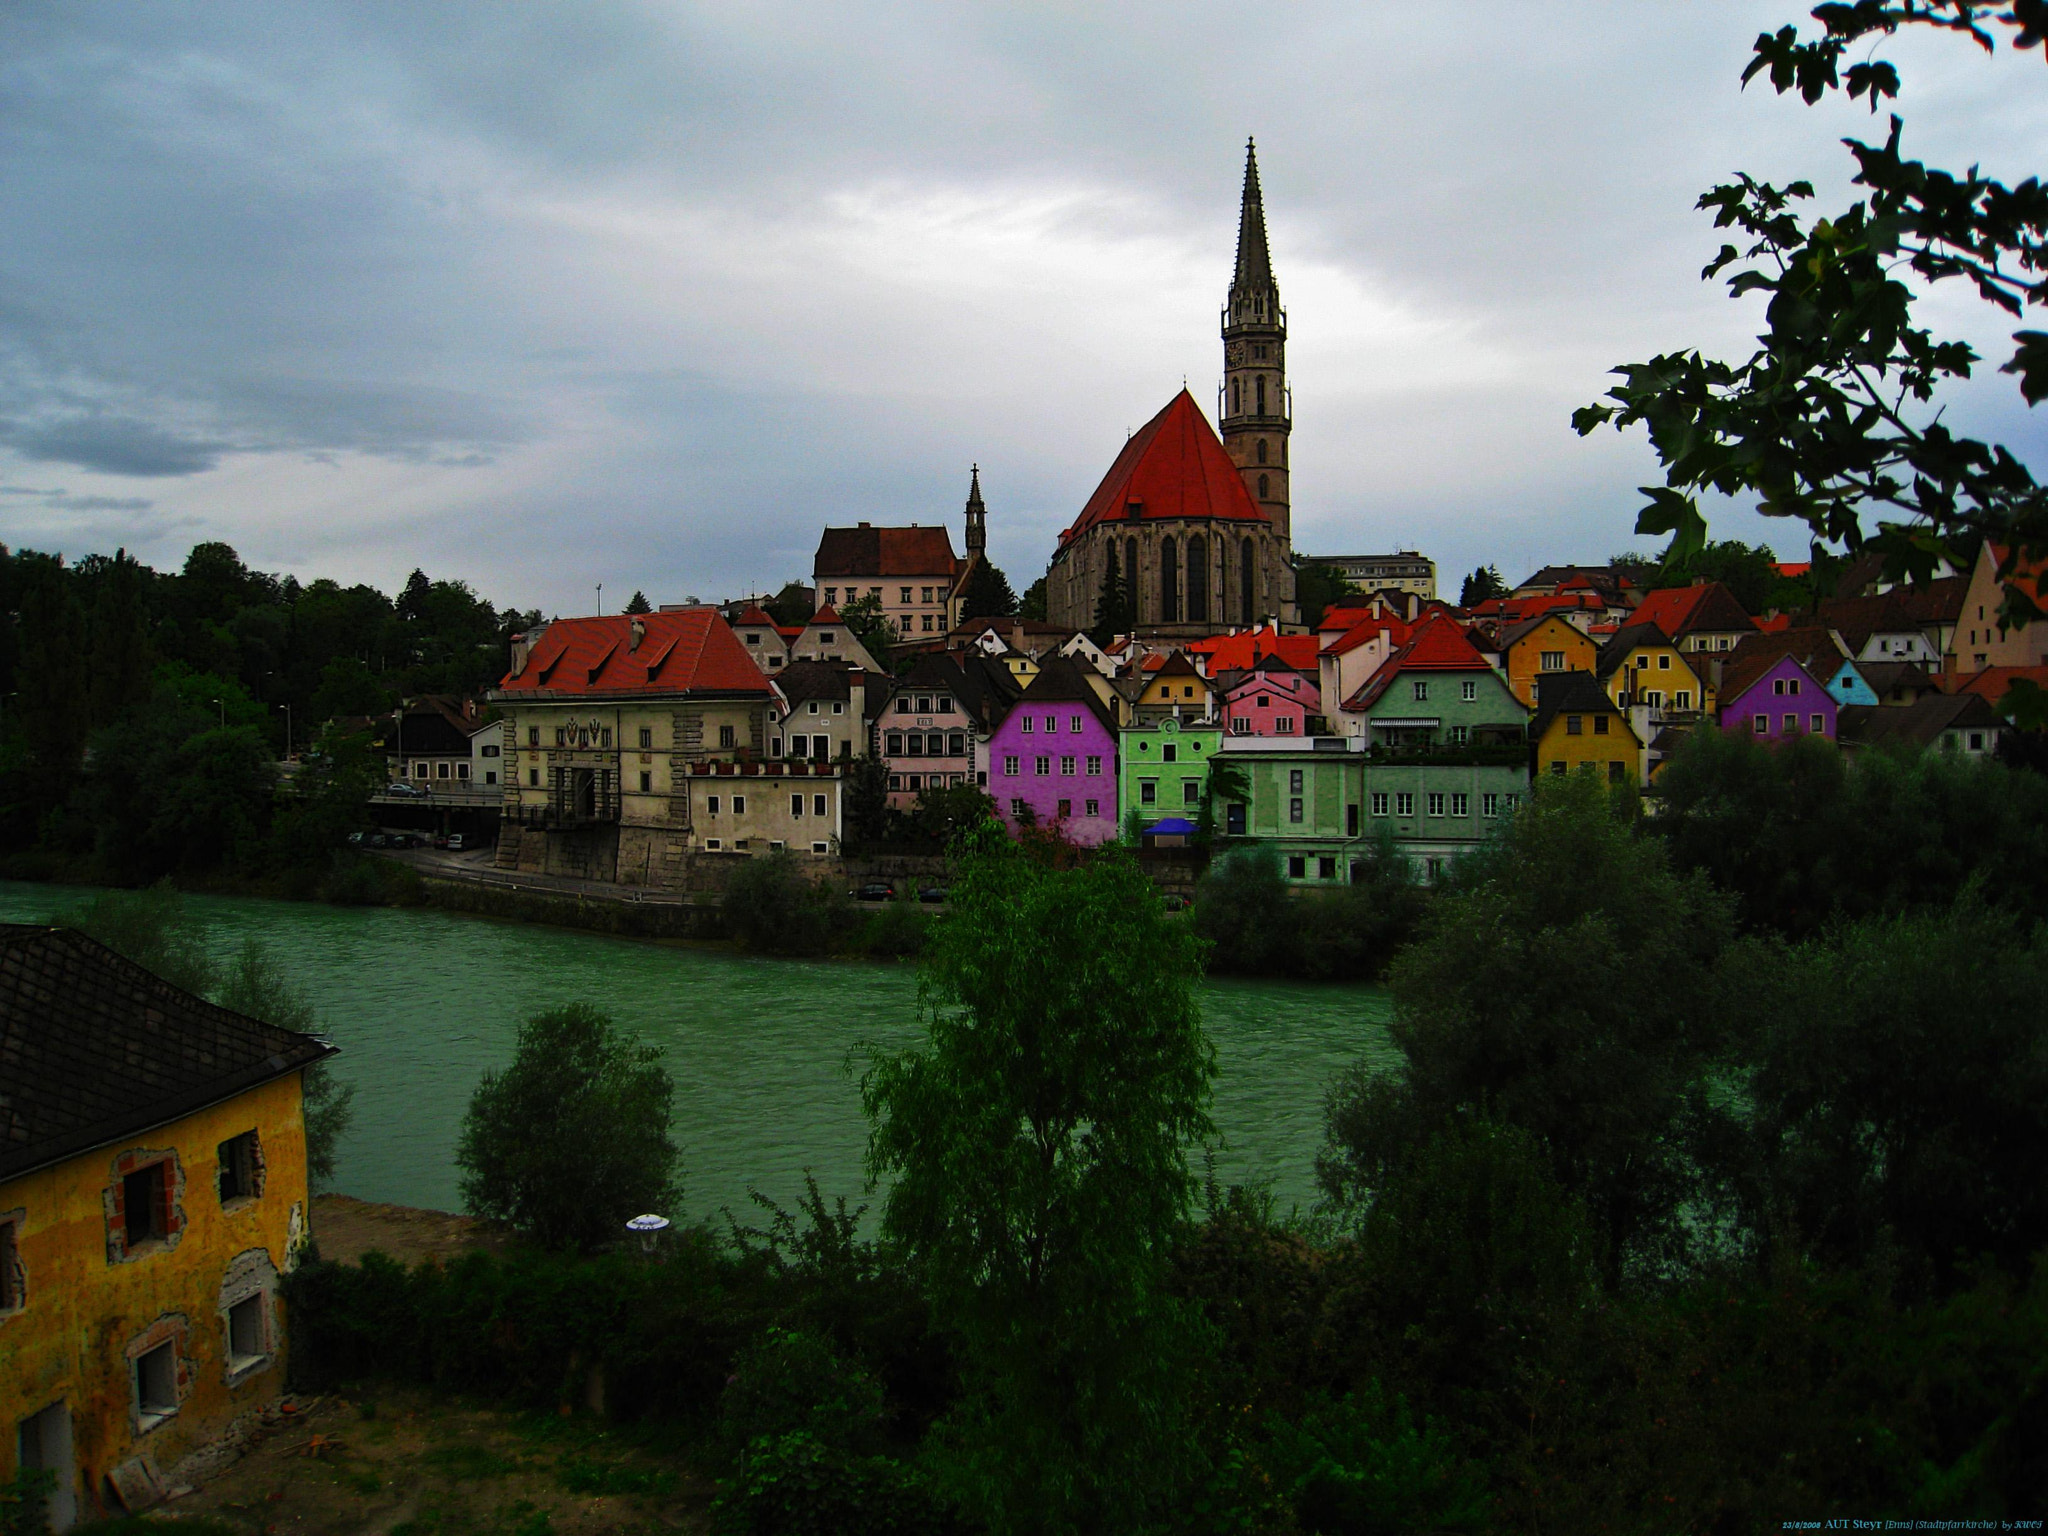 Canon DIGITAL IXUS 860 IS sample photo. Aut steyr [rainy day ~enns] aug 2008 by kwot photography